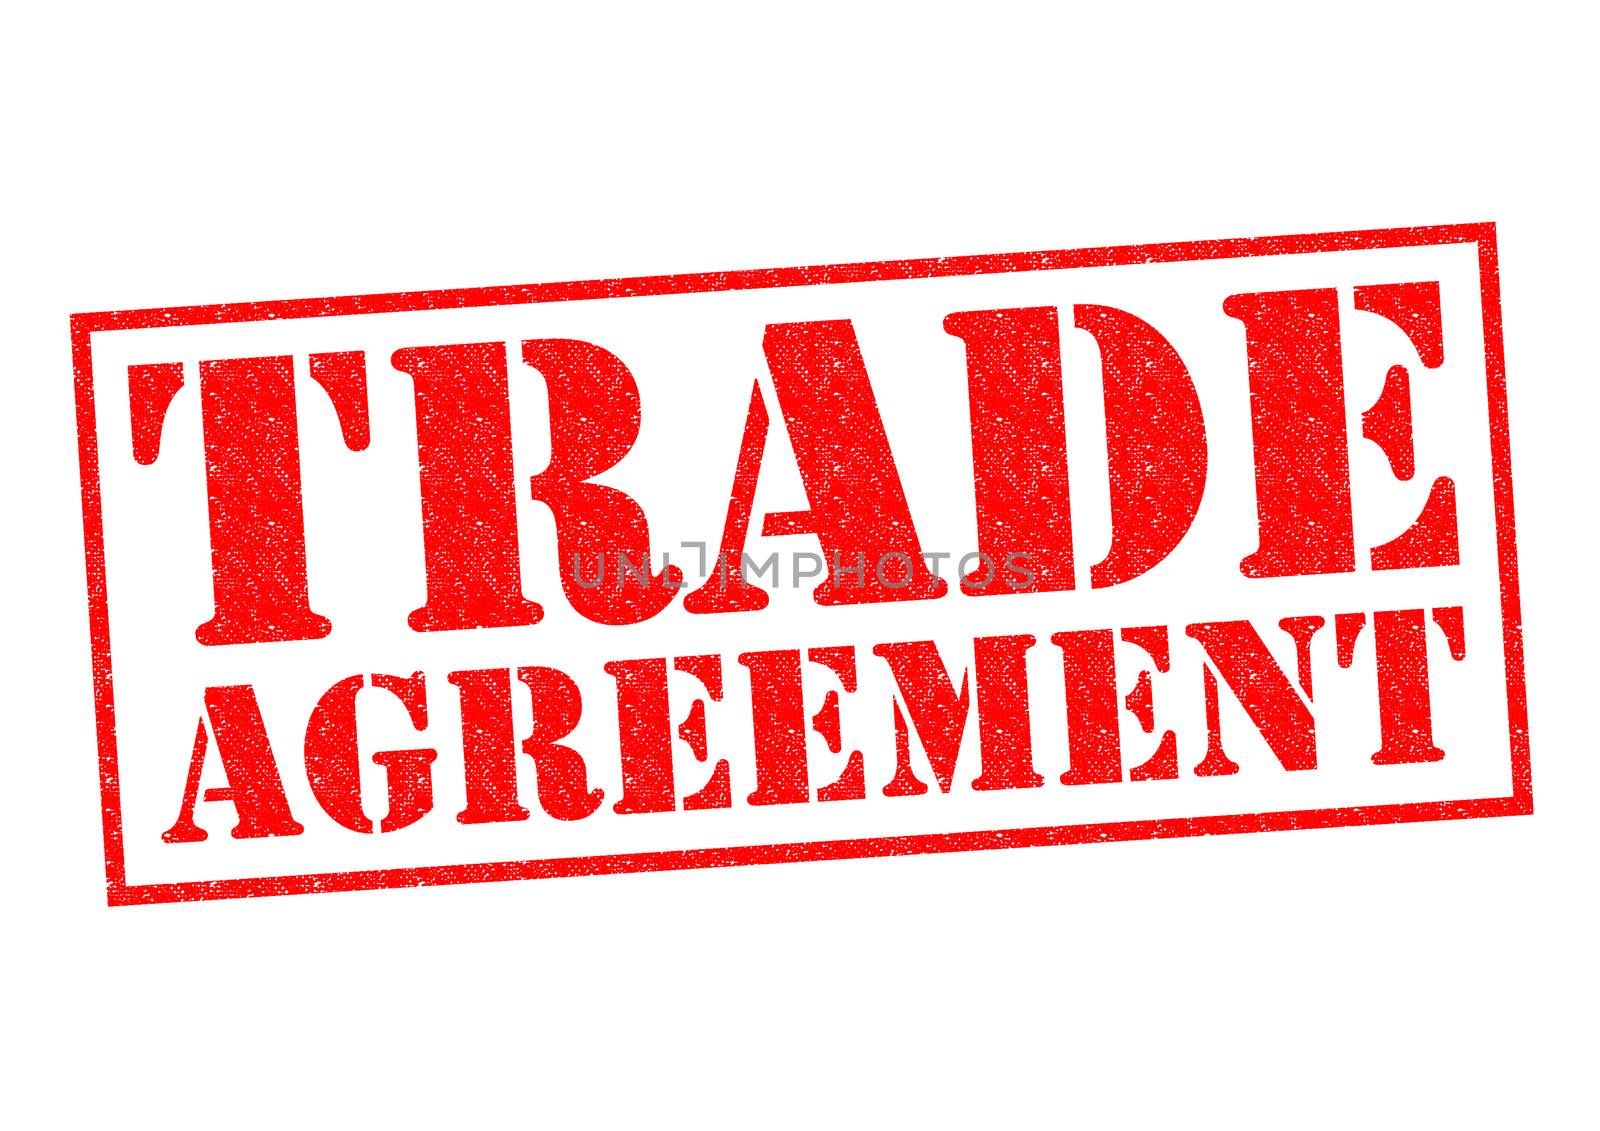 TRADE AGREEMENT red Rubber Stamp over a white background.